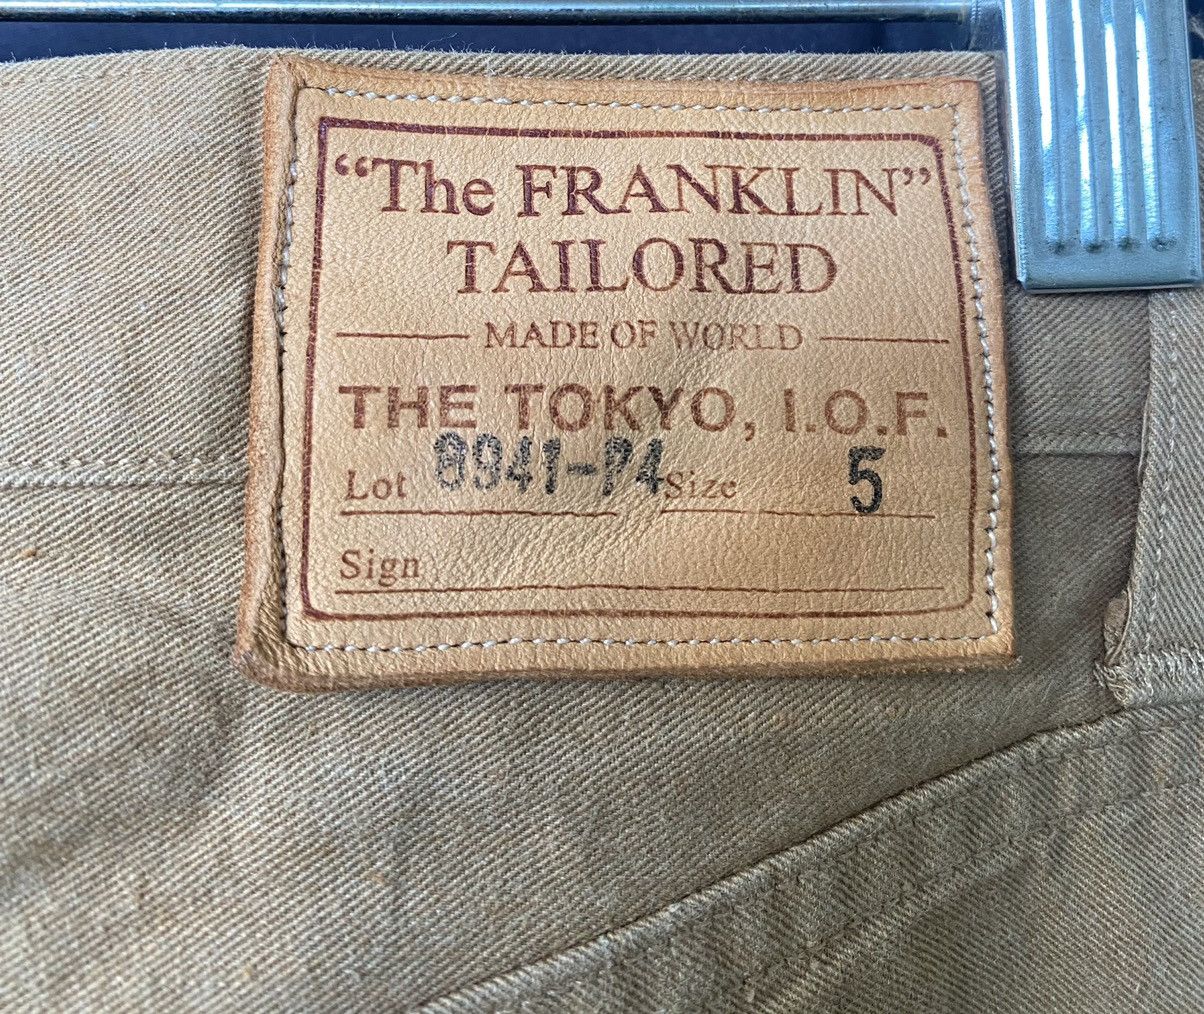 Japanese Brand The Franklin tailored Selvadge pants Size US 30 / EU 46 - 5 Thumbnail